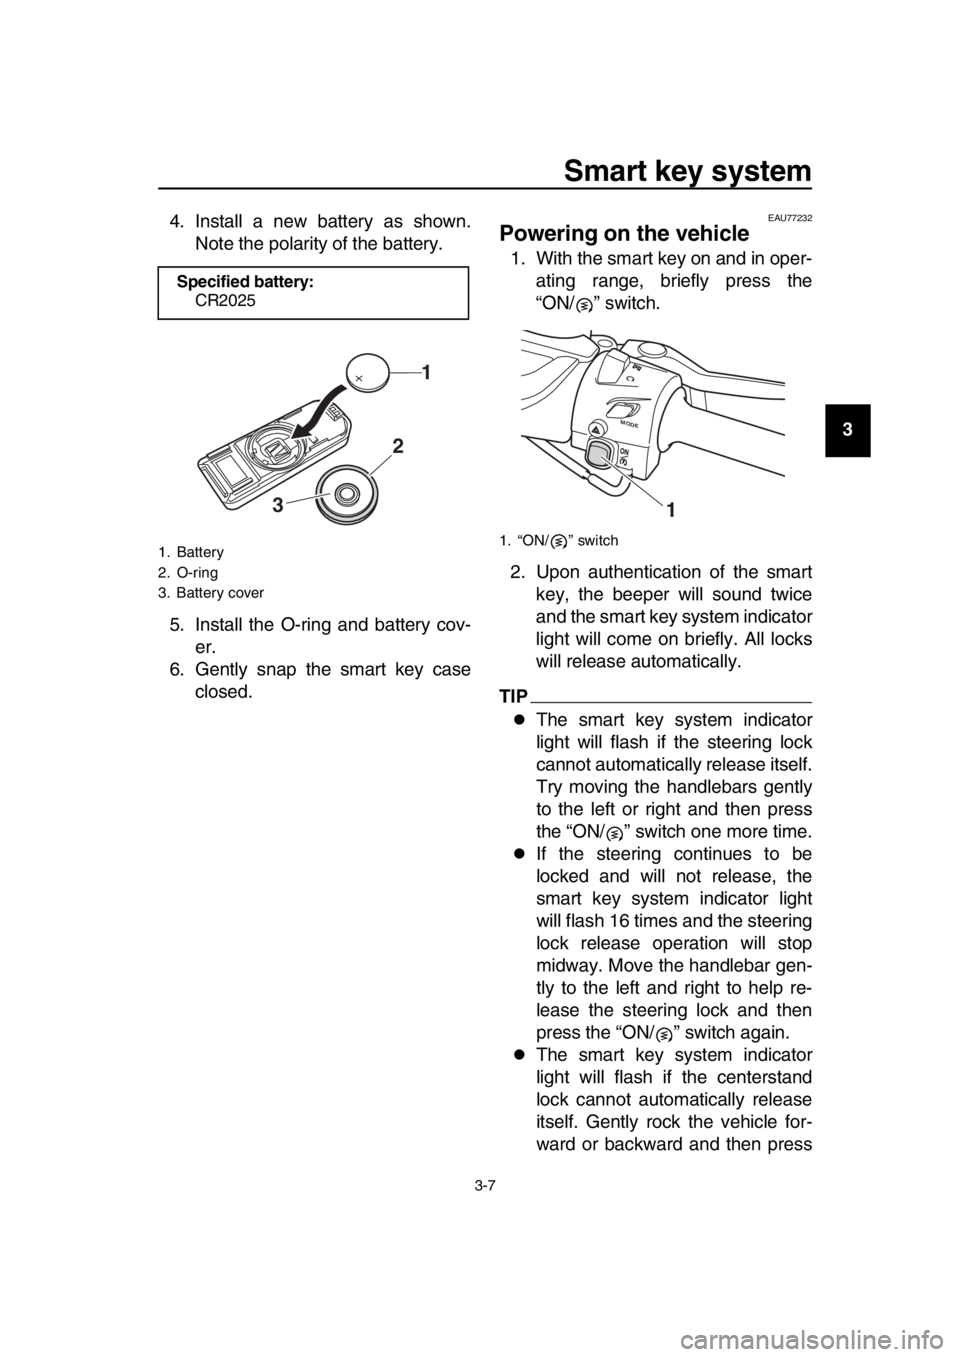 YAMAHA TMAX 2017  Owners Manual Smart key system
3-7
1
2
3
4
5
6
7
8
9
10
11
12
13
14
4. Install a new battery as shown.
Note the polarity of the battery.
5. Install the O-ring and battery cov- er.
6. Gently snap the smart key case 